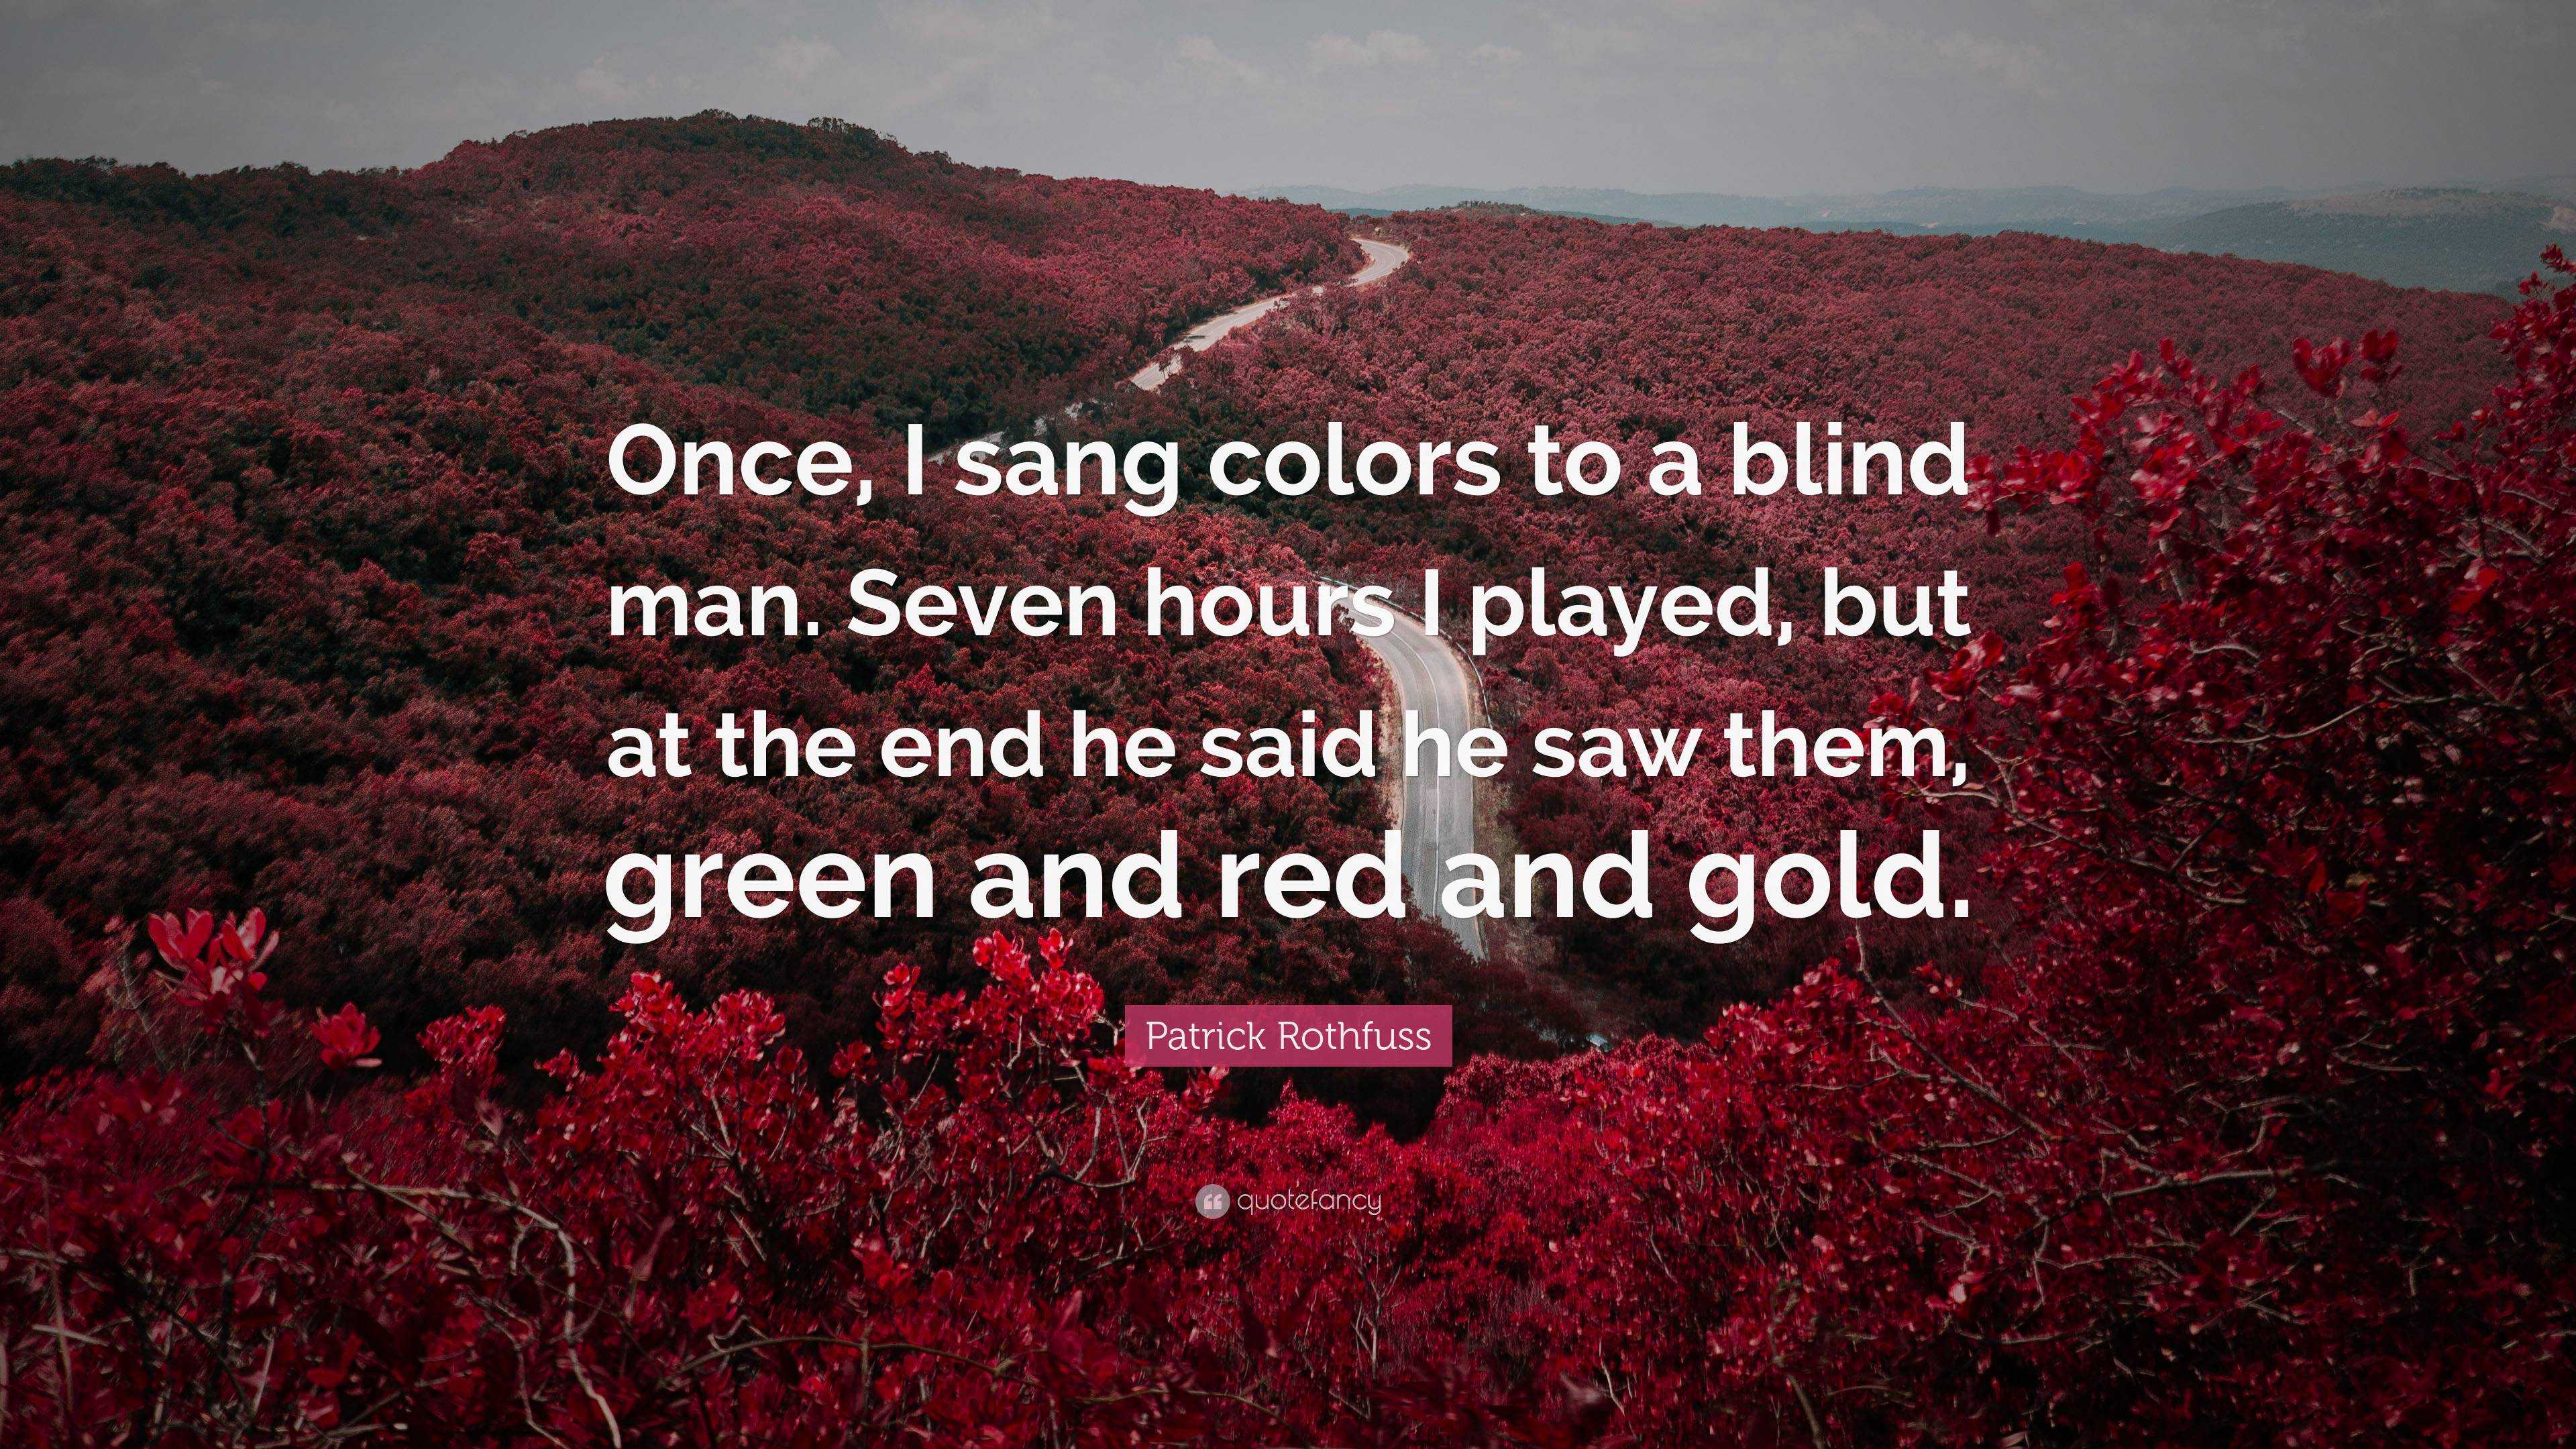 patrick-rothfuss-quote-once-i-sang-colors-to-a-blind-man-seven